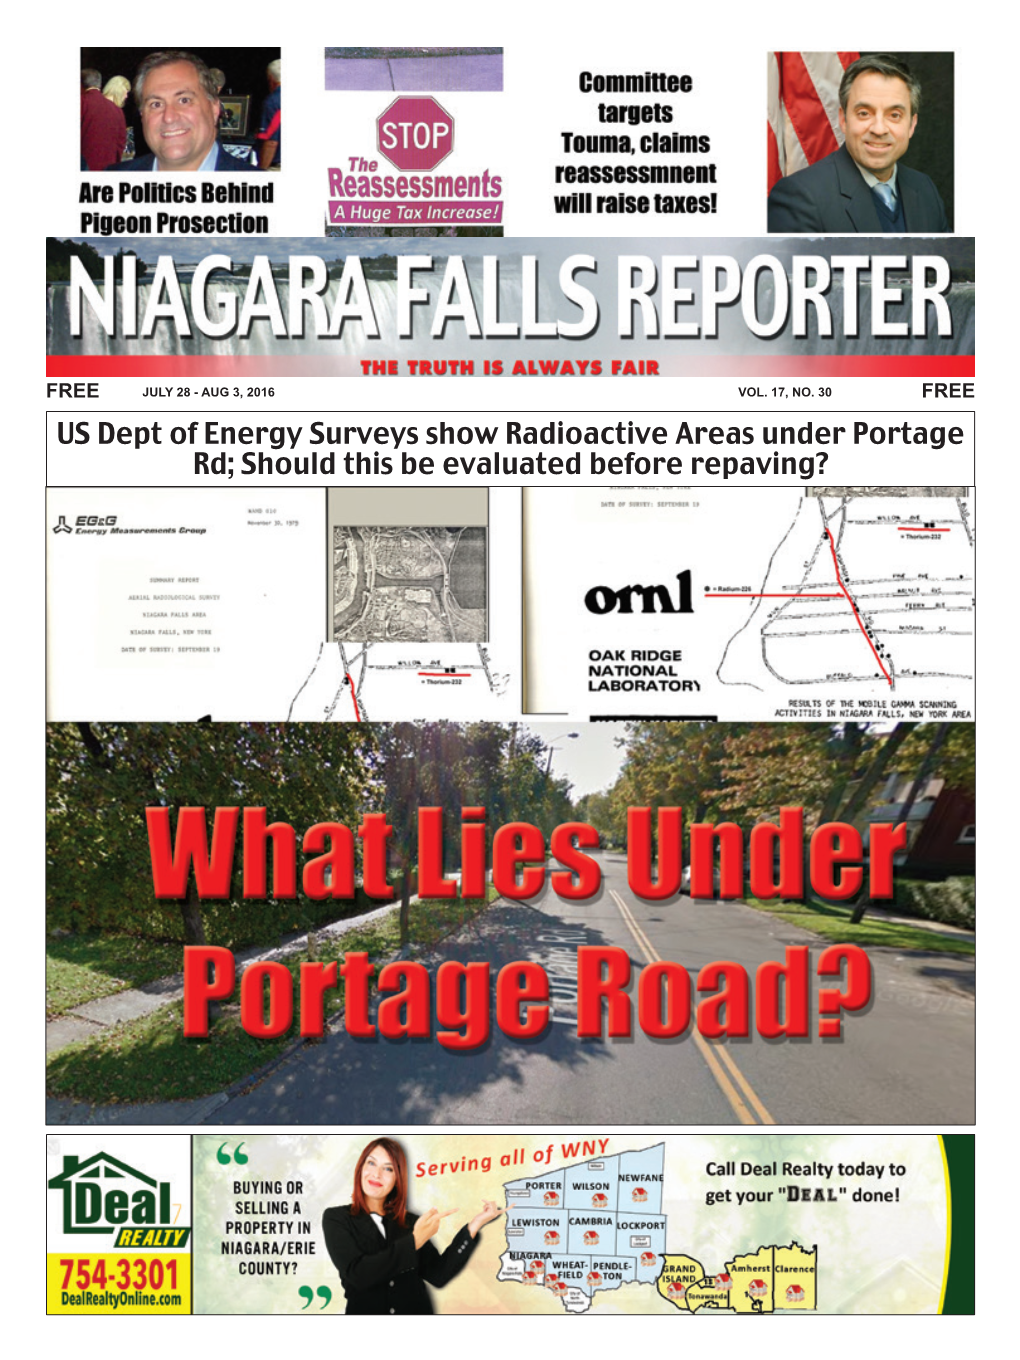 US Dept of Energy Surveys Show Radioactive Areas Under Portage Rd; Should This Be Evaluated Before Repaving? 2 NIAGARA FALLS REPORTER JULY 28 - AUG 3, 2016